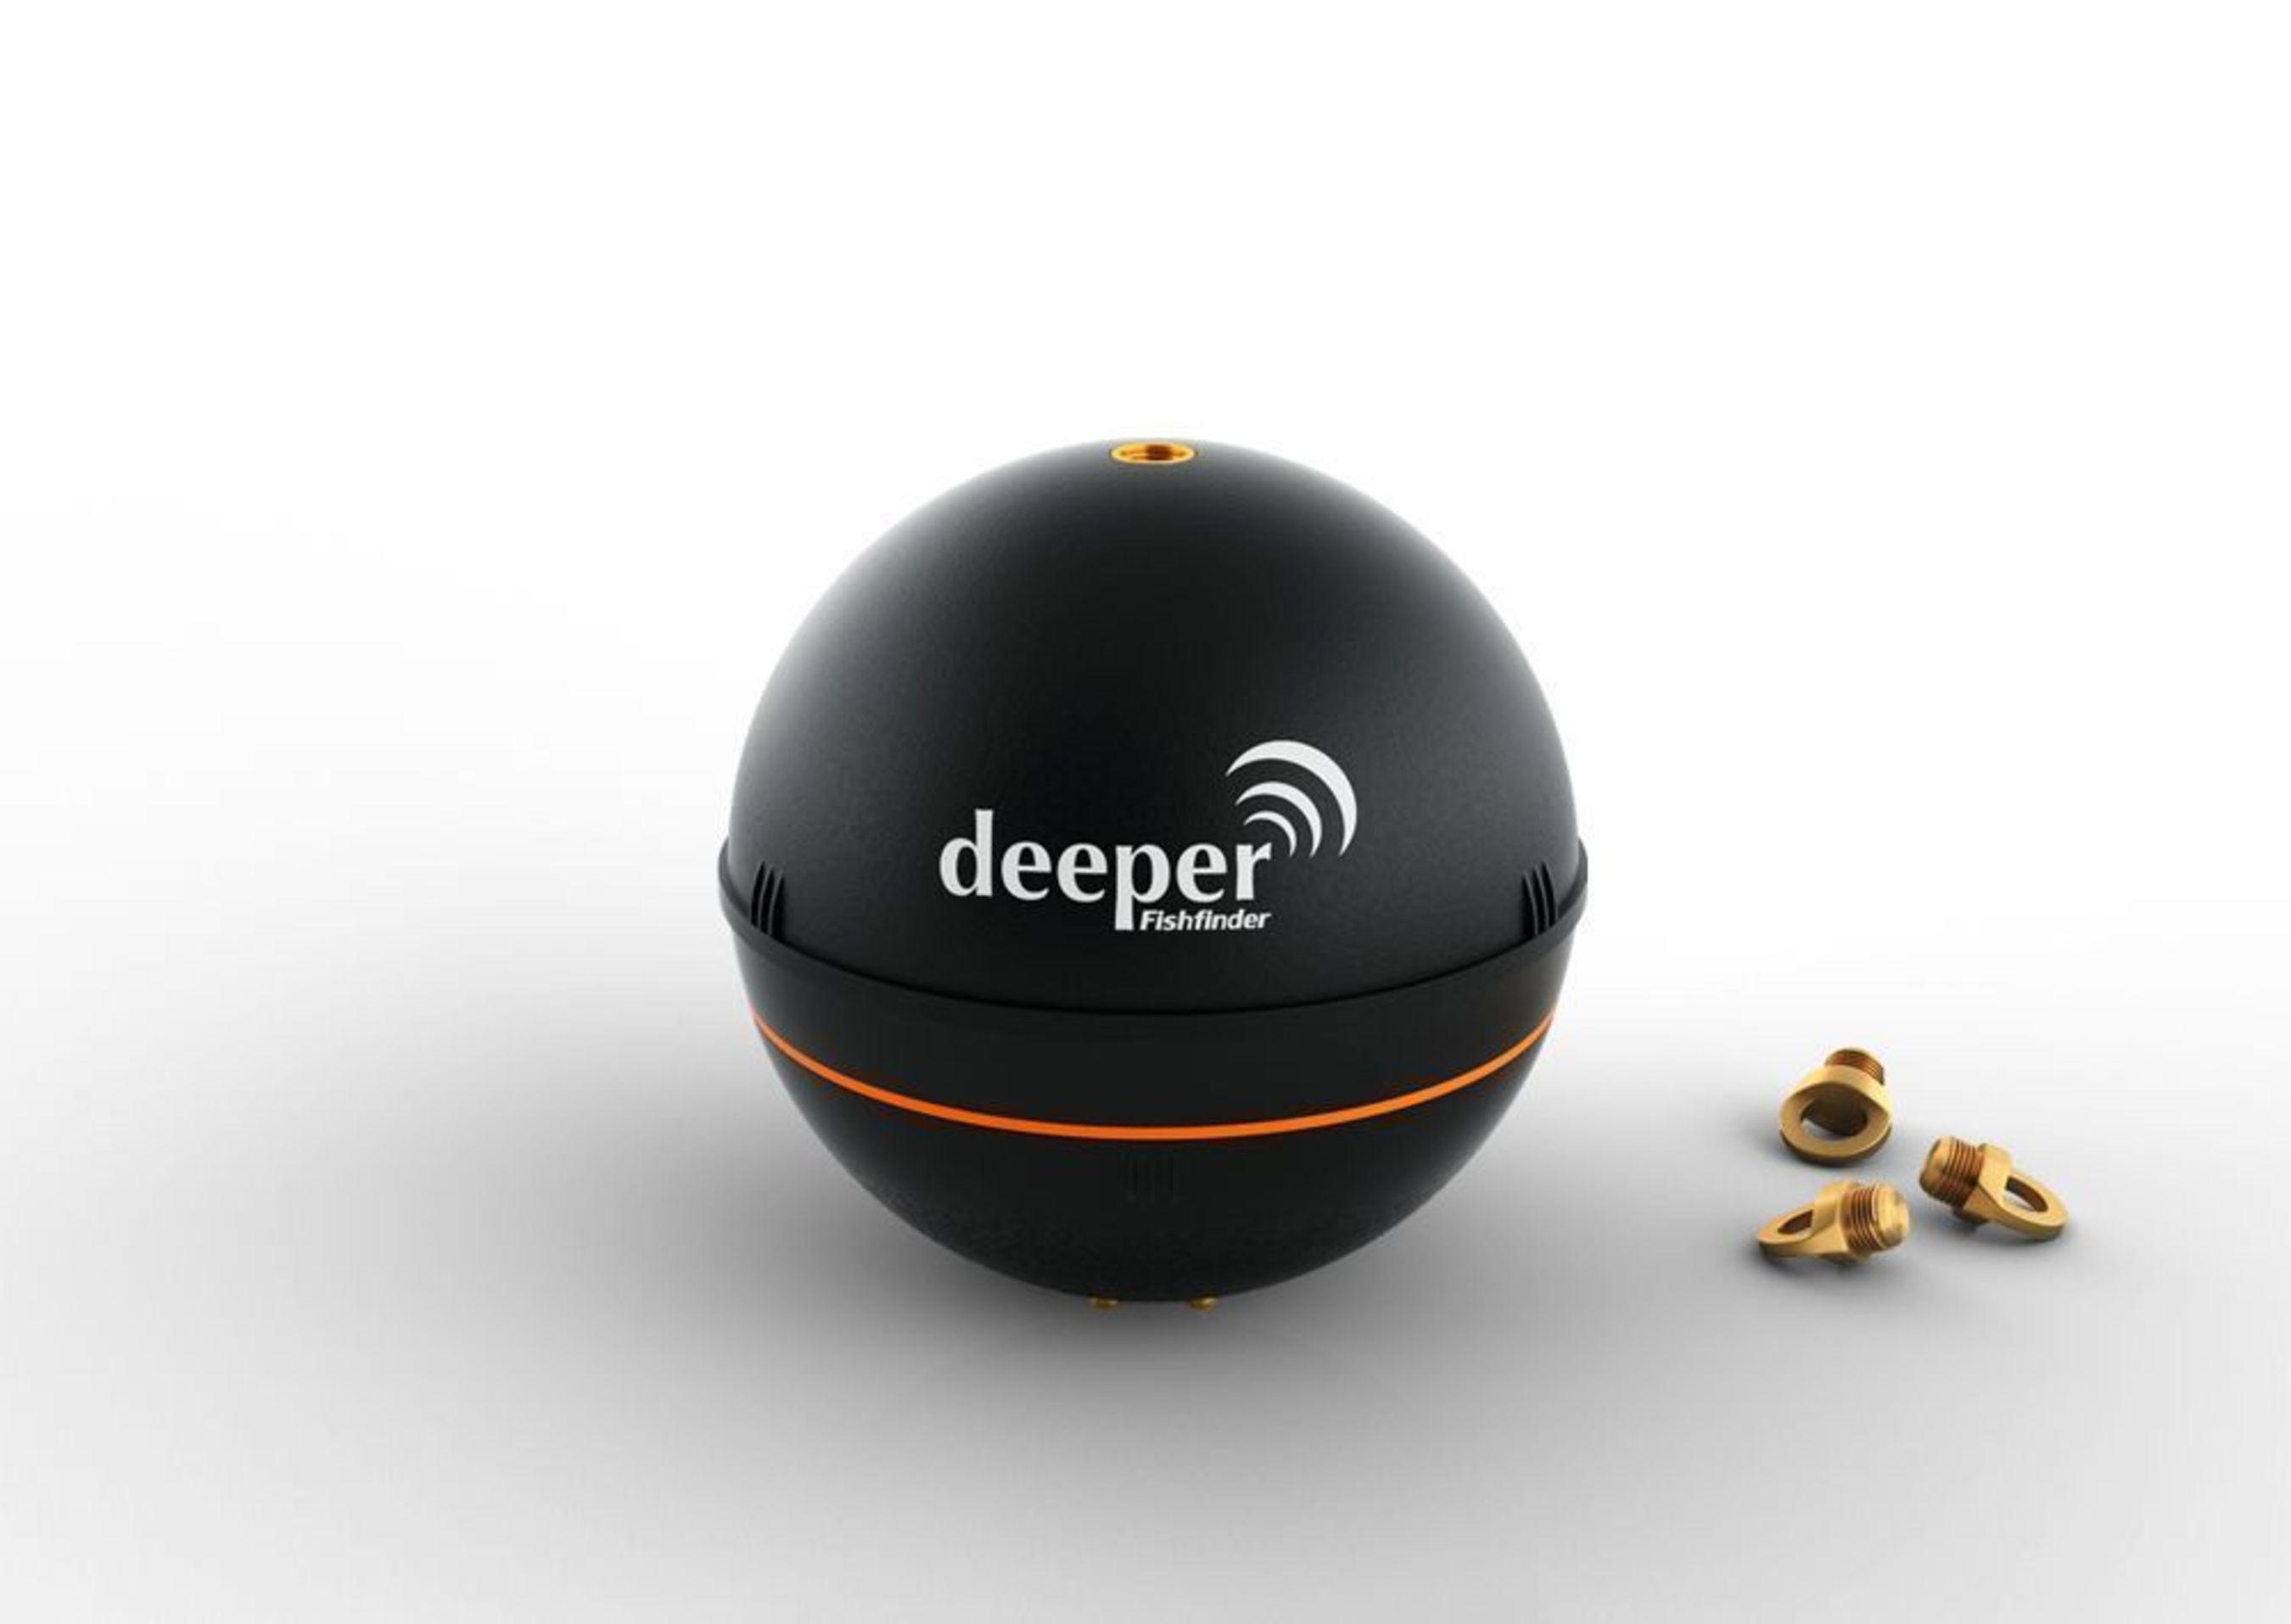 Deeper®: the Smart Fish Finder Gadget and App, Now Available in